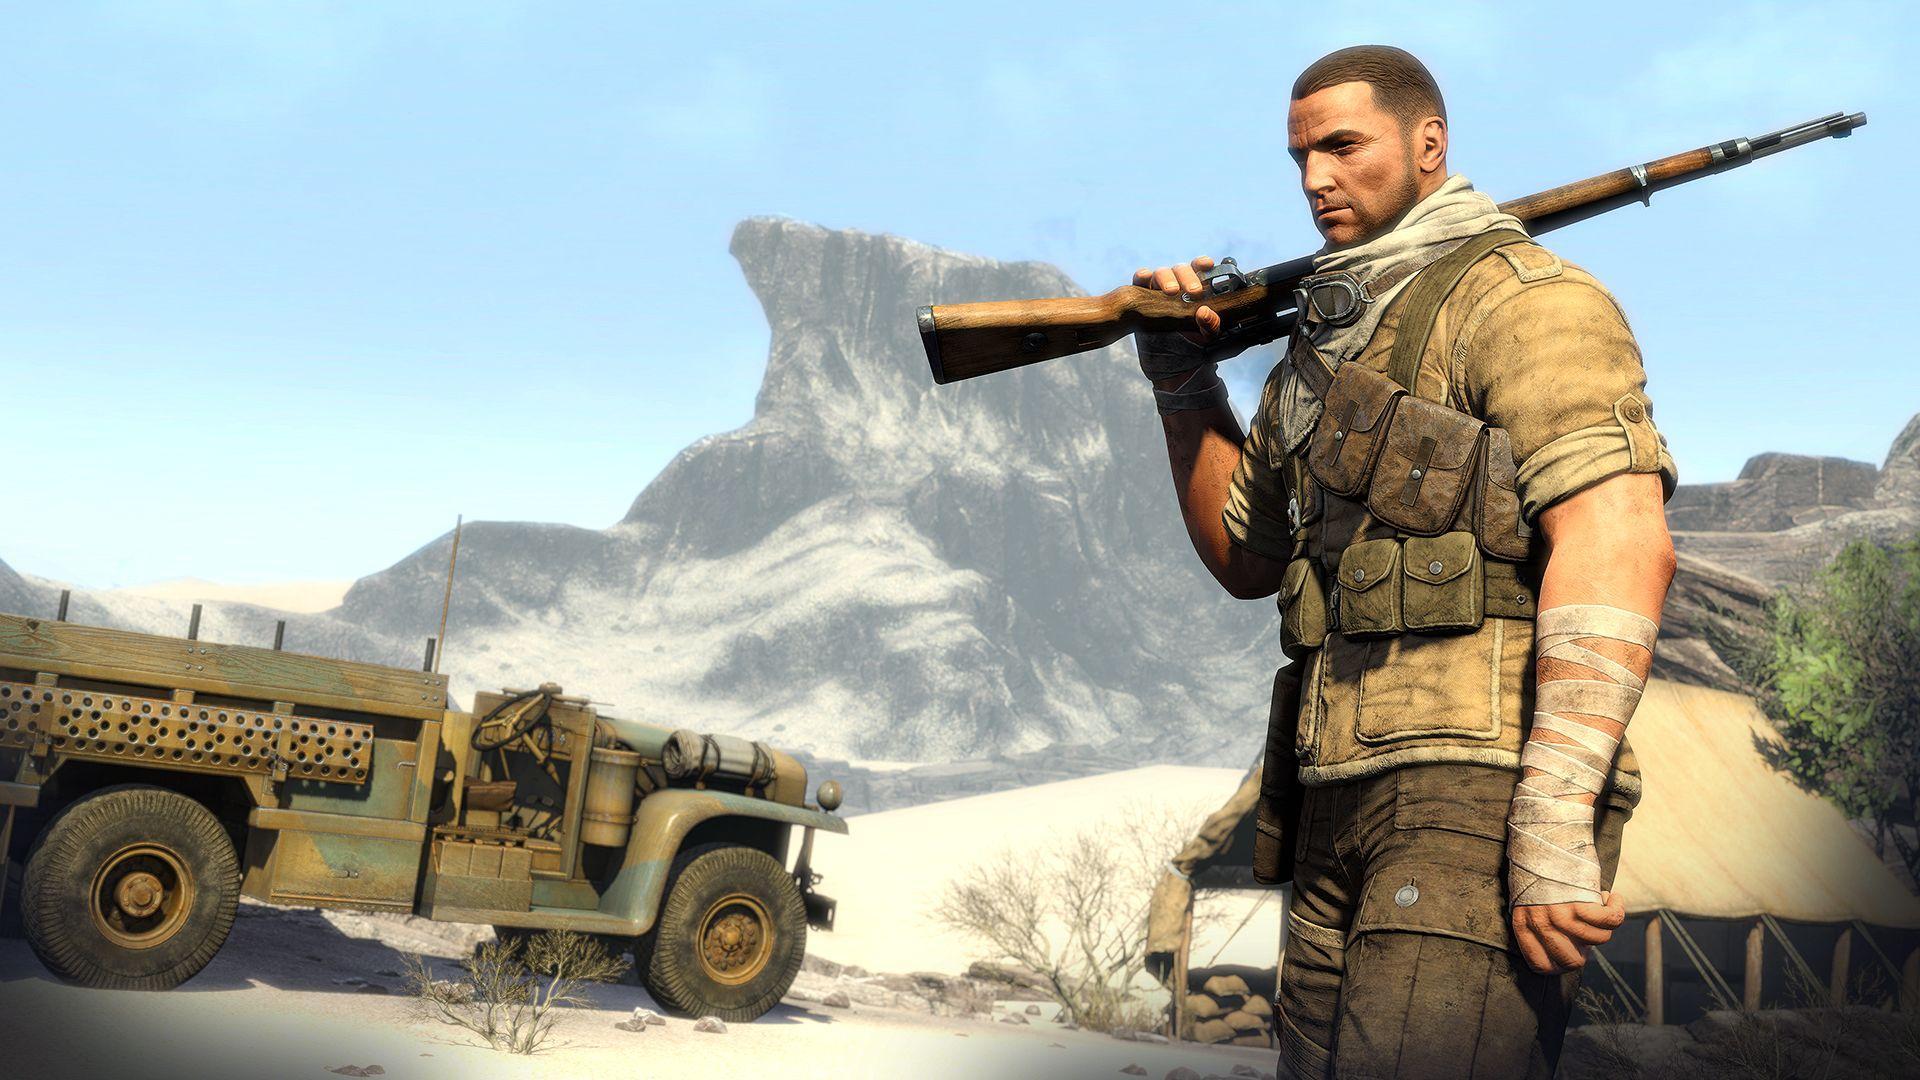 Sniper Elite 3 For Xbox One Has A 10GB Mandatory Day One Patch